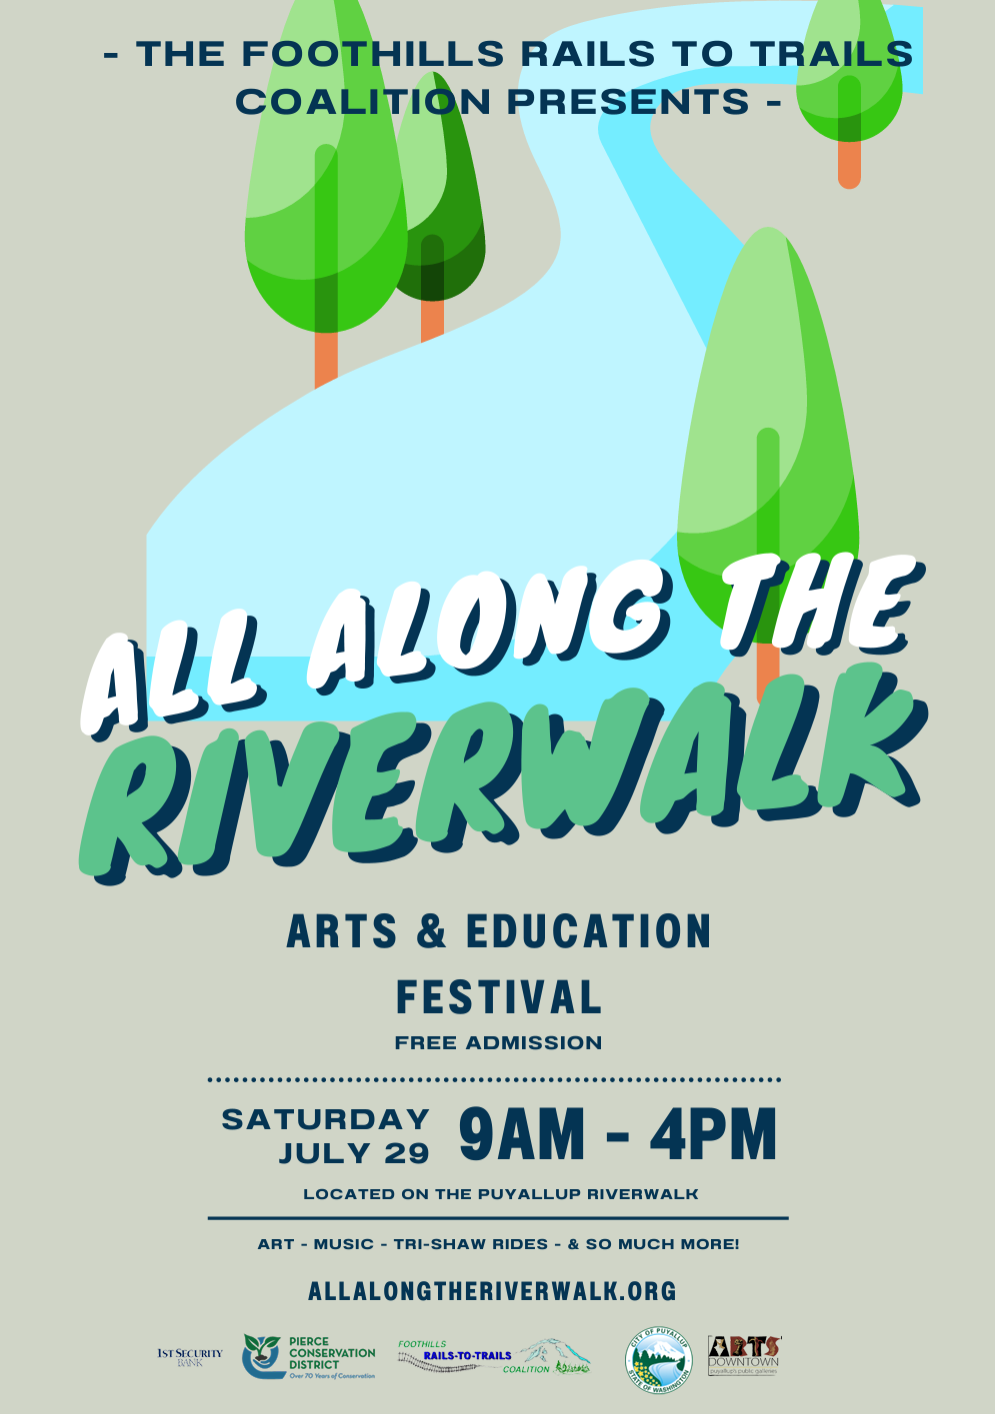 All Along the River Walk Art and Music Festival